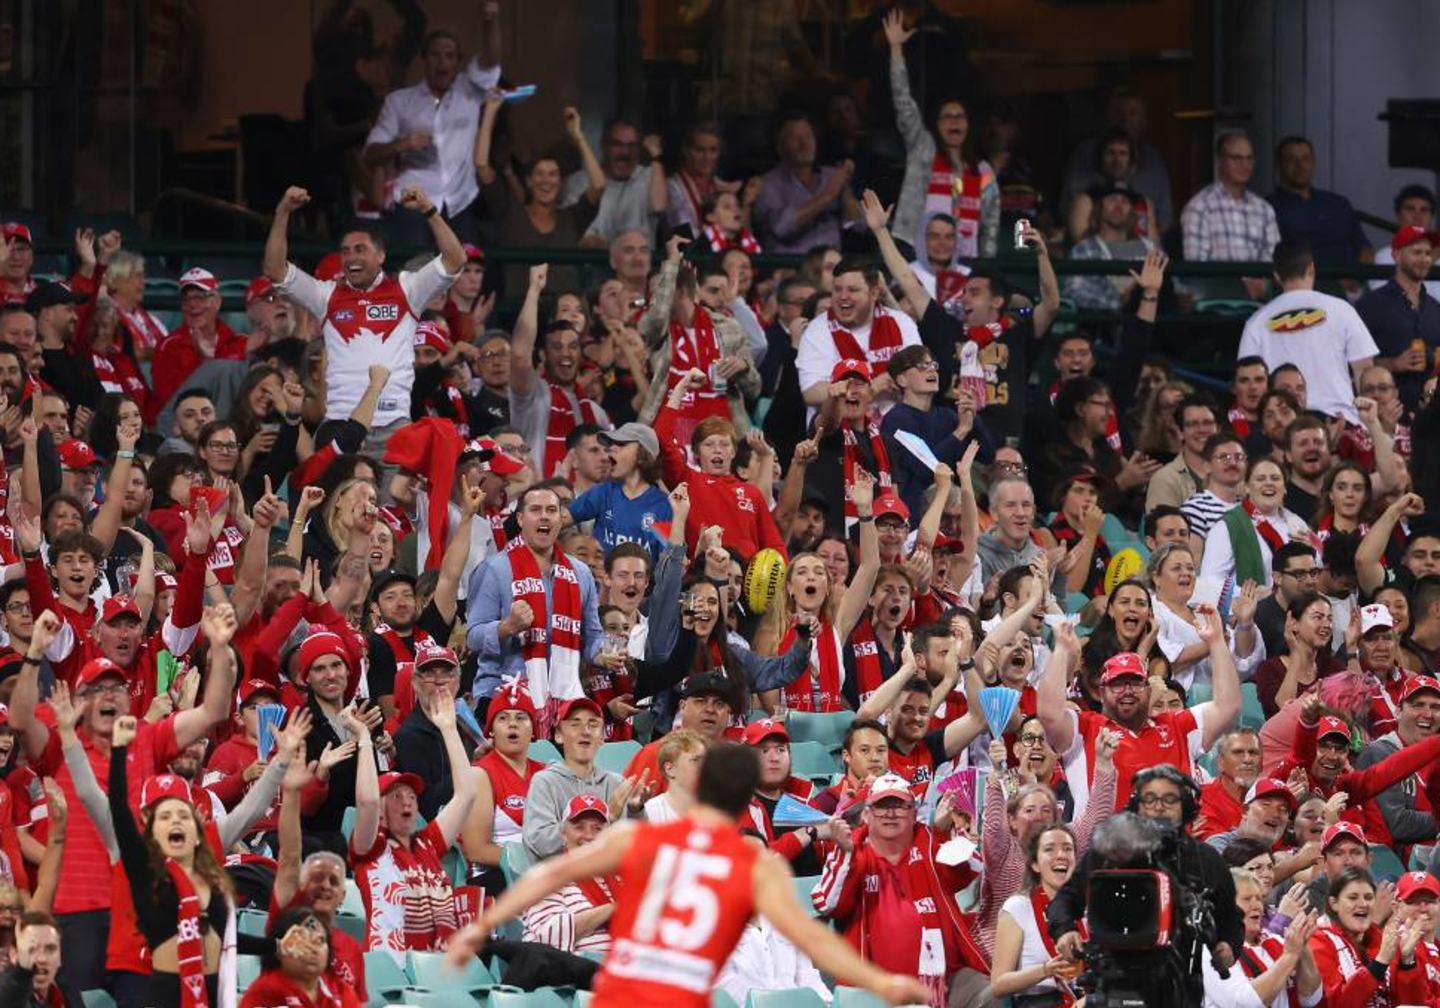 Image of fans celebrating at an Australian rules football match 